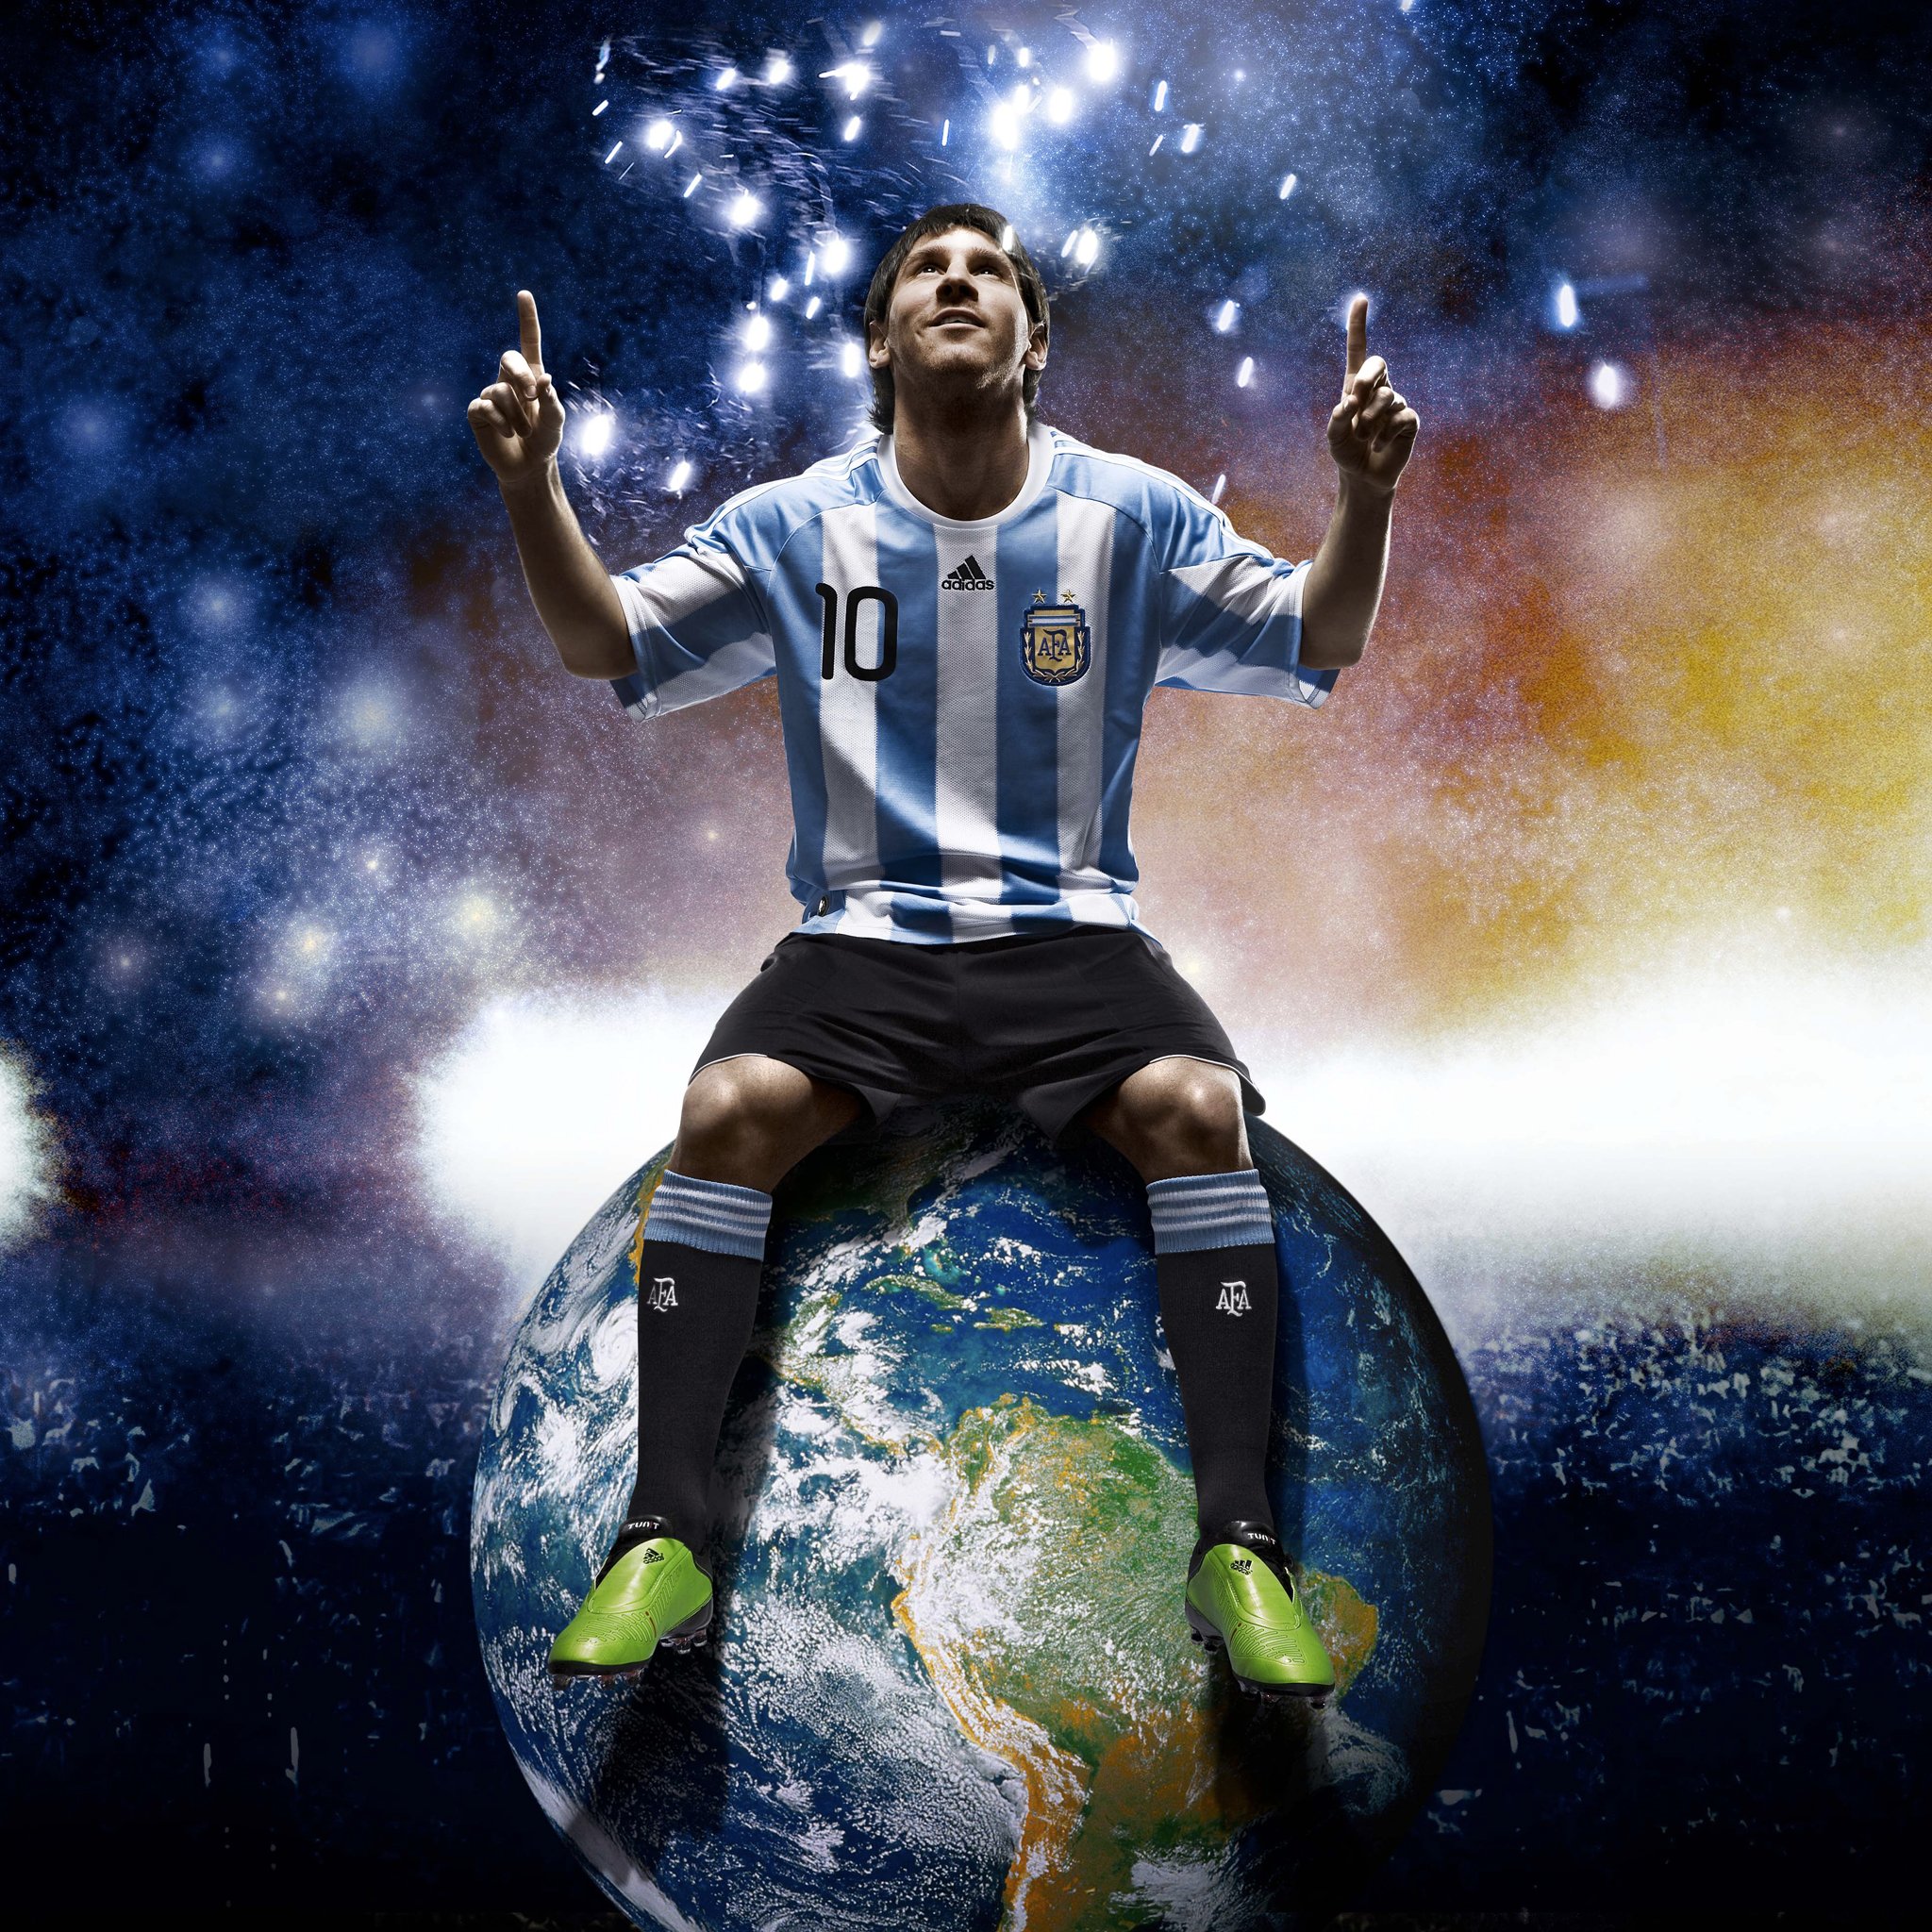 Leo Messi Wallpaper for iPhone Pro Max, X, 6